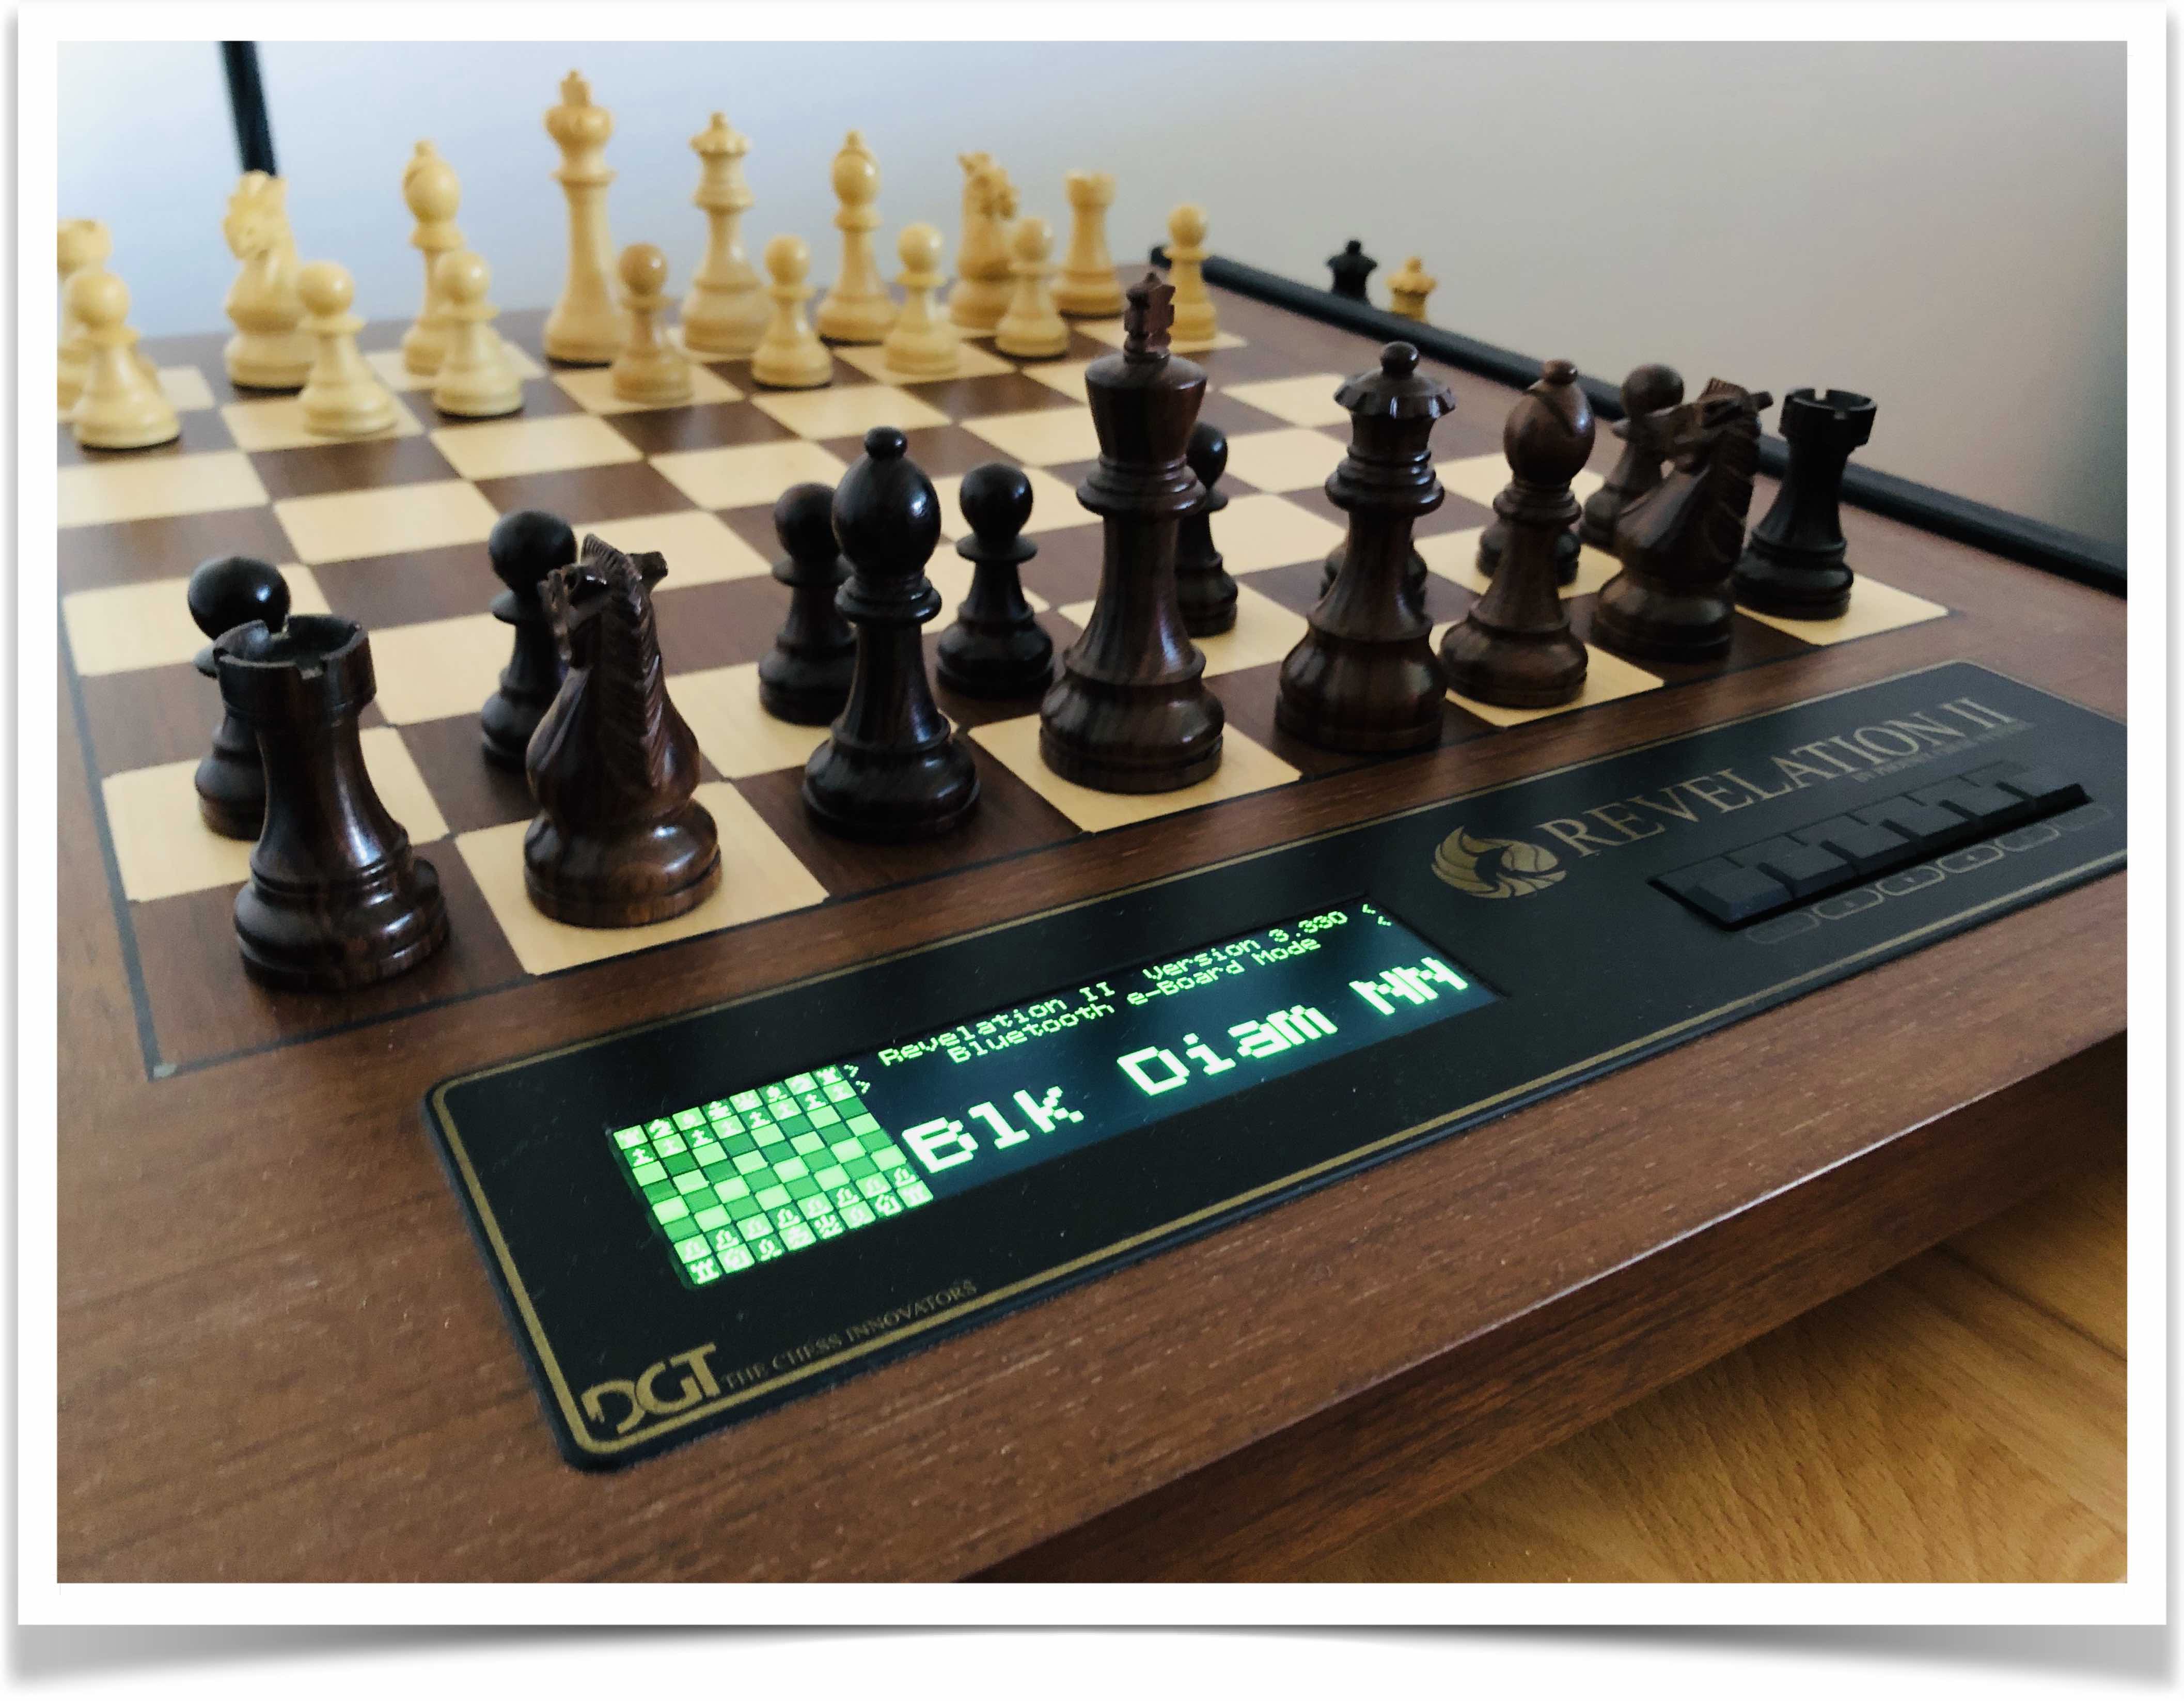 The “Control” board in the Fritz 13 chess program